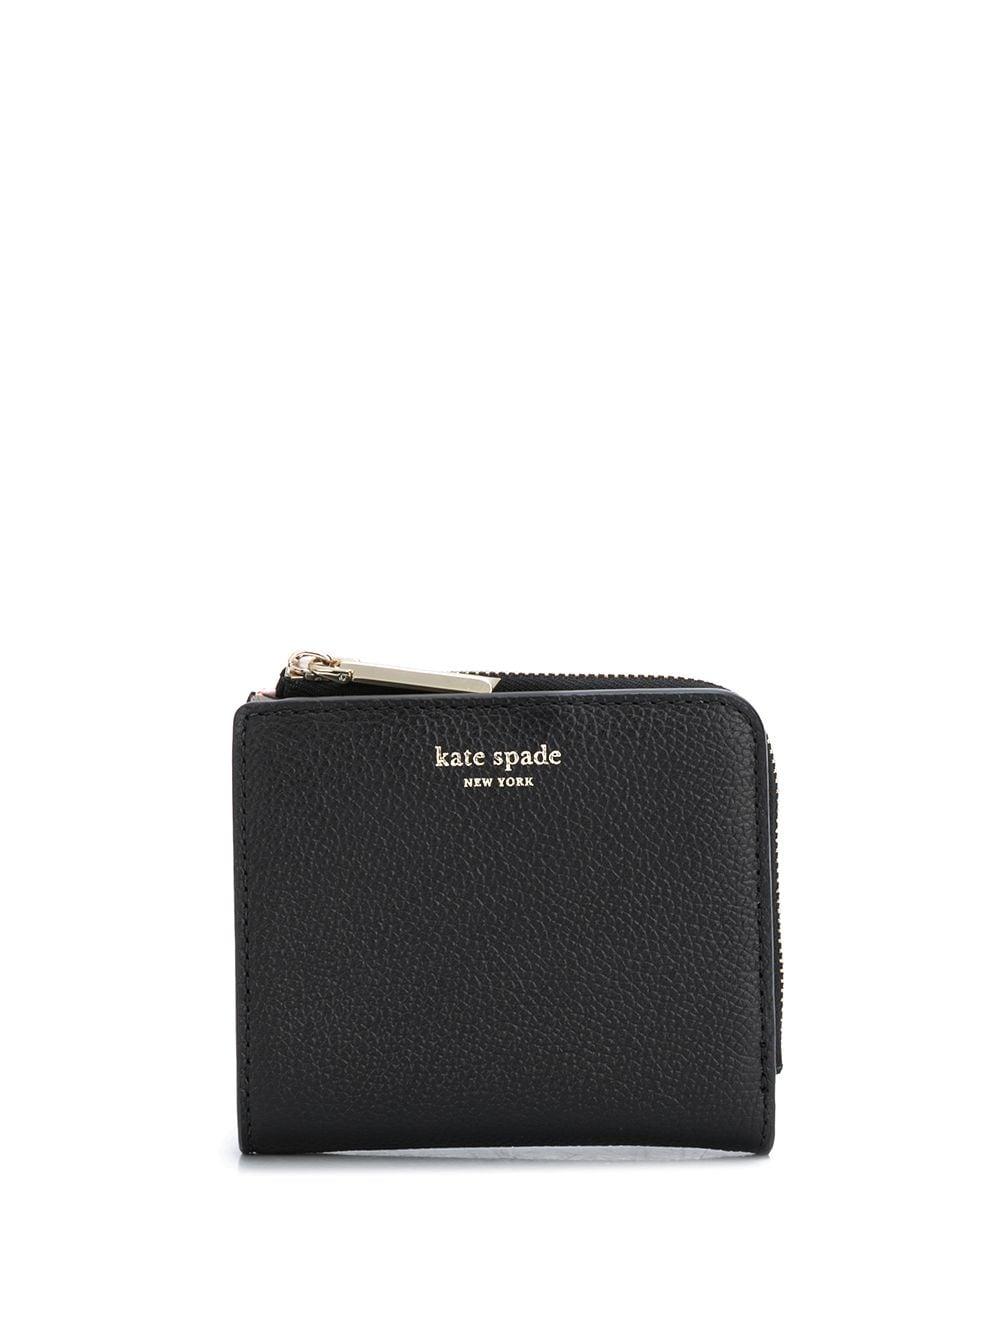 Kate Spade Leather Margaux Small Bifold Wallet in Black - Lyst